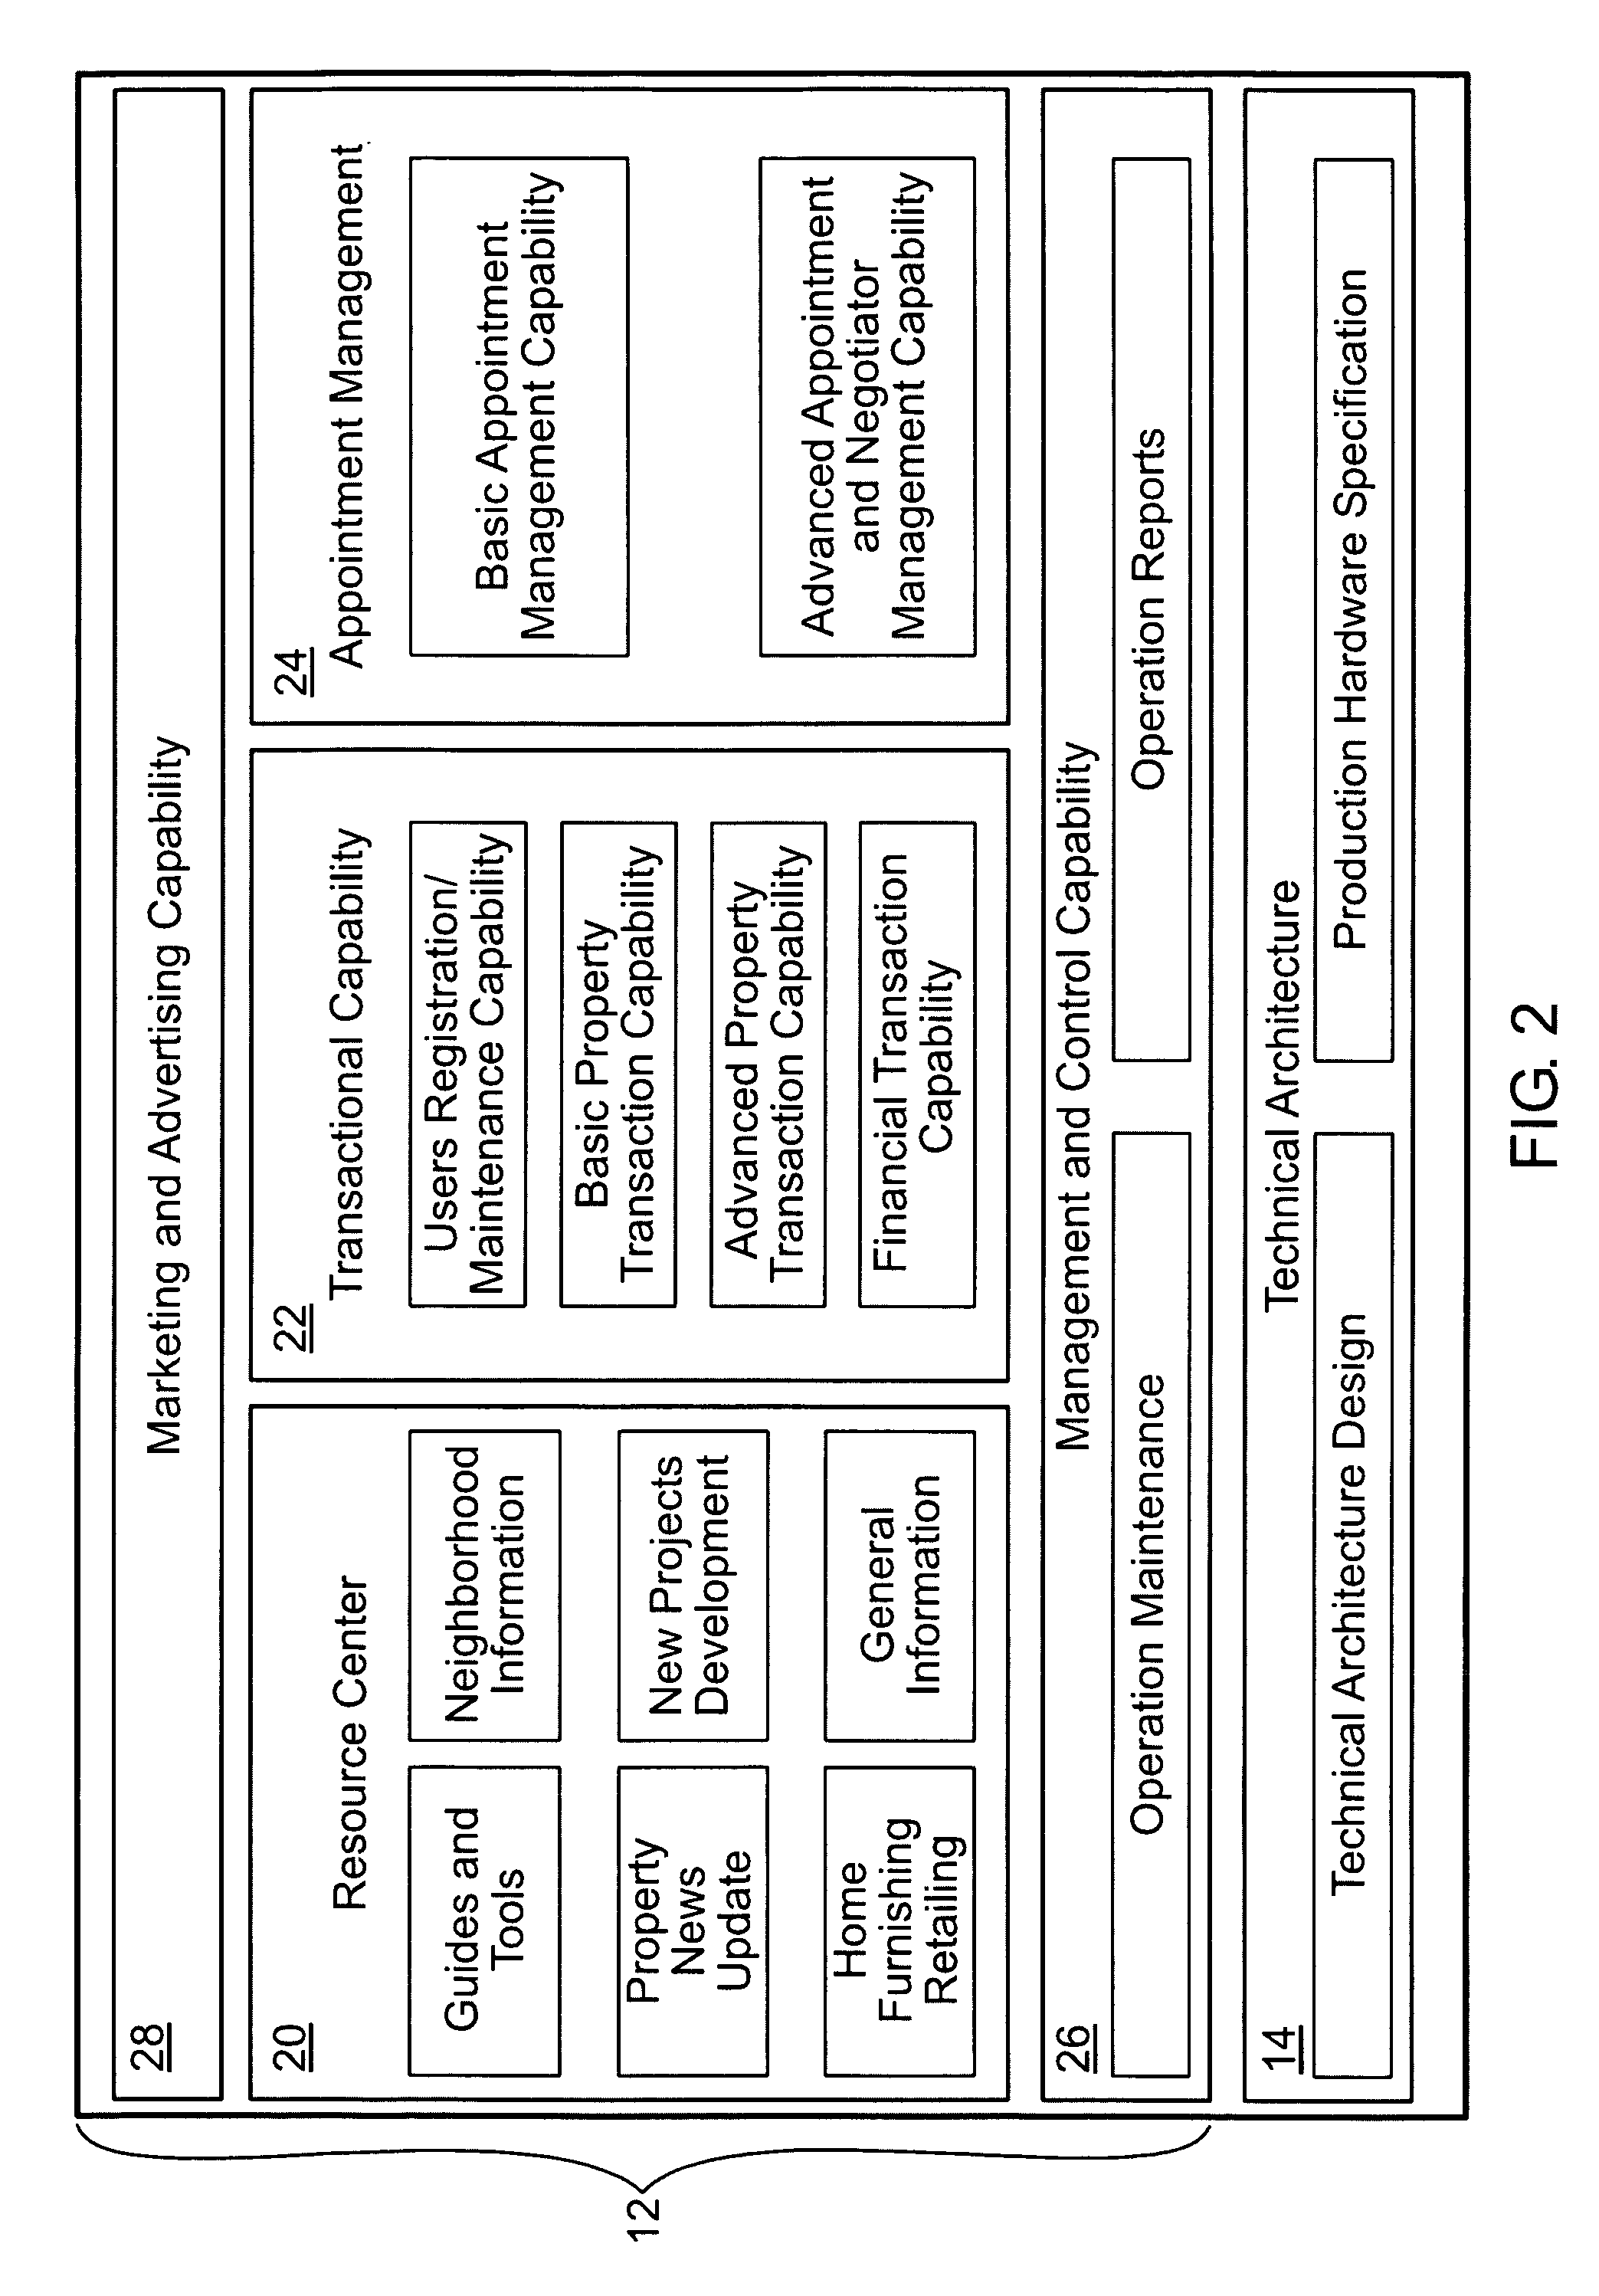 System and method for assisting the buying and selling of property